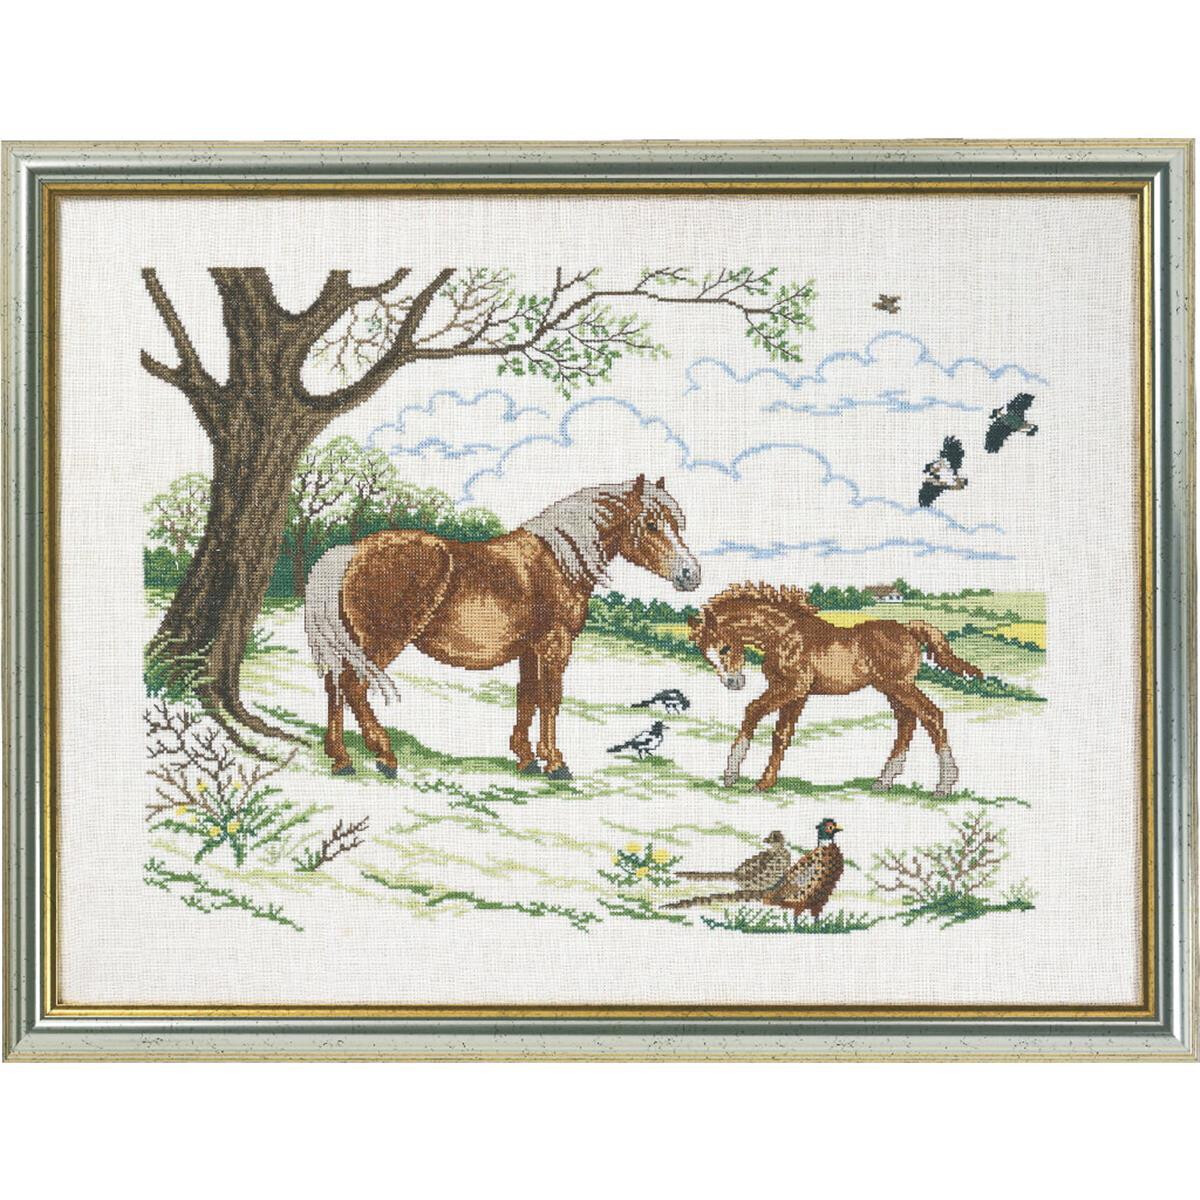 Eva Rosenstand counted cross stitch kit "Horses with...